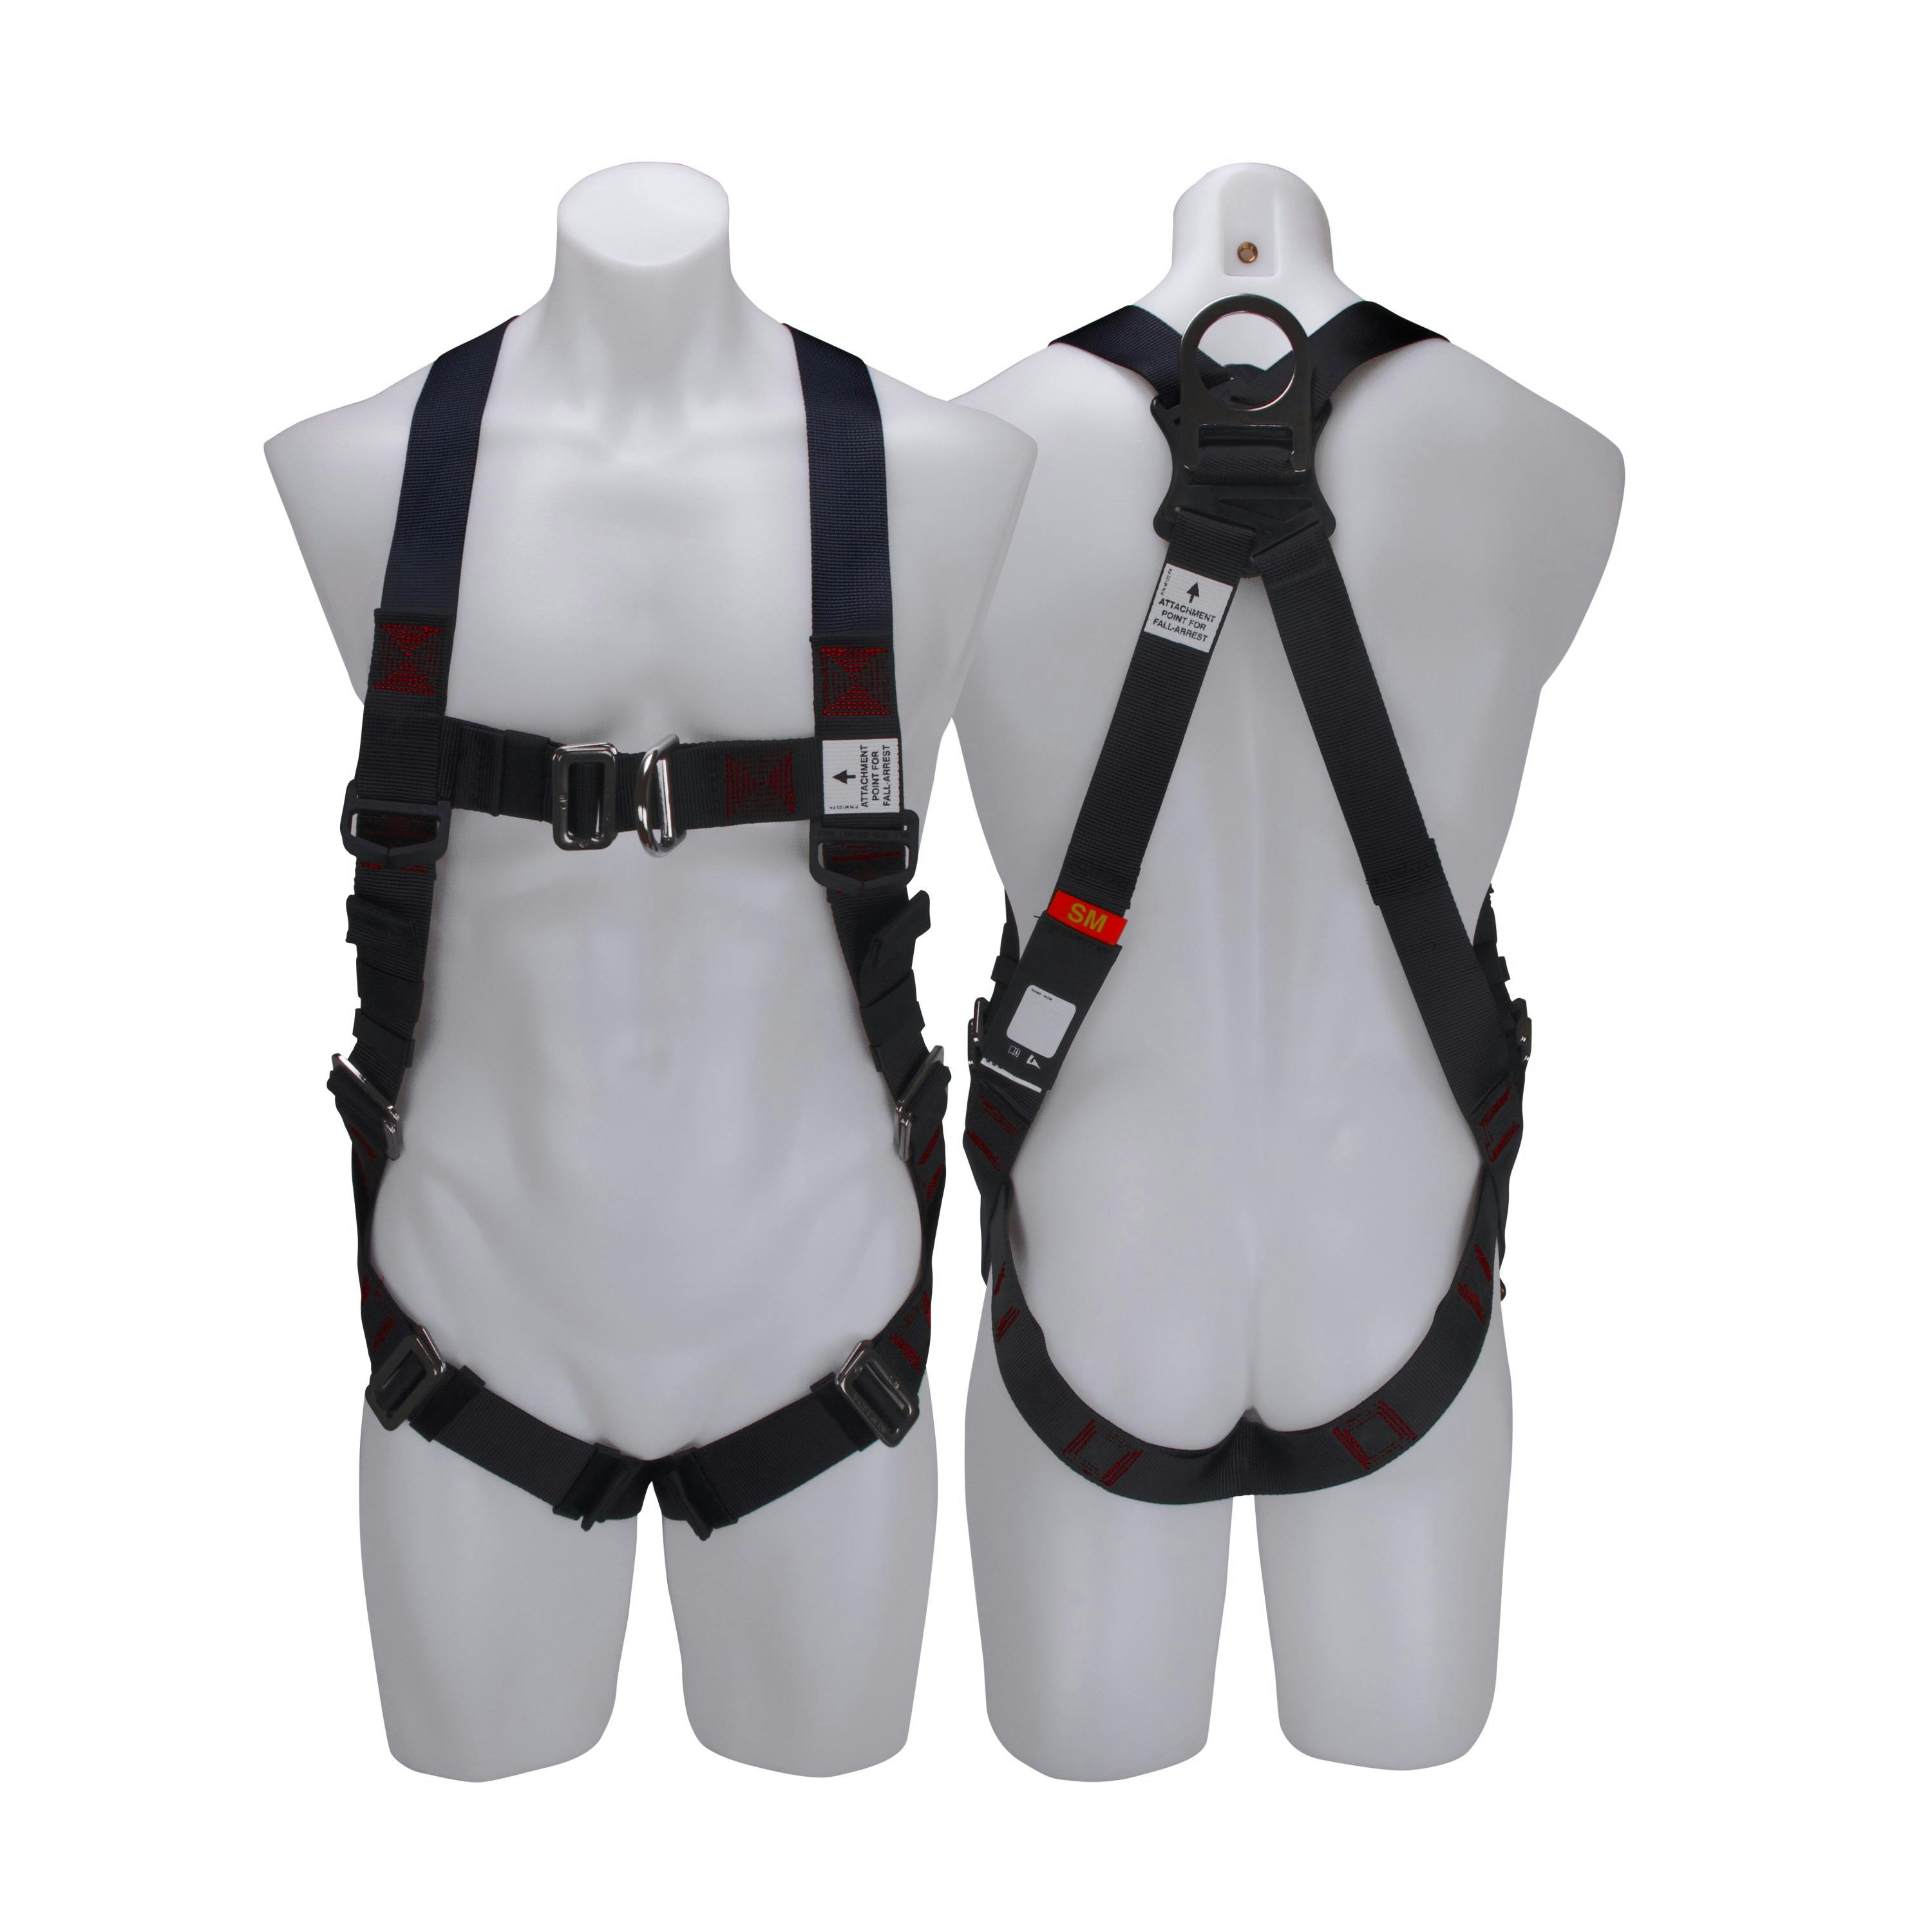 3M™ PROTECTA® X Riggers Harness with Stainless Steel and Pass Through Buckles 1161660, Red and Black, Small, 1 EA/Case